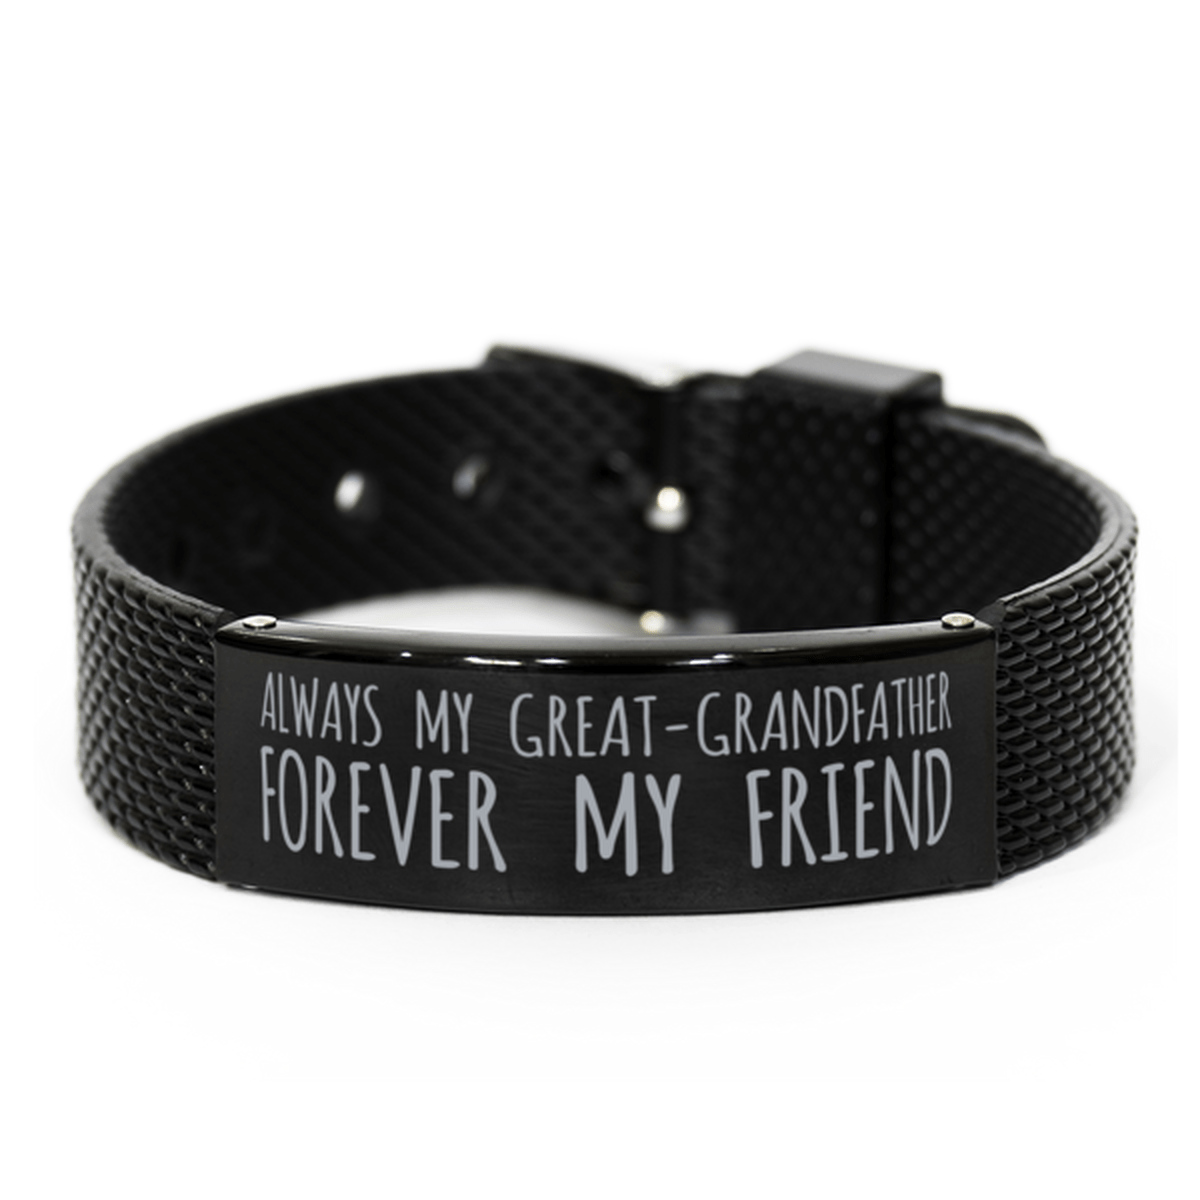 Inspirational Great Grandfather Black Shark Mesh Bracelet, Always My Great Grandfather Forever My Friend, Best Birthday Gifts for Family Friends